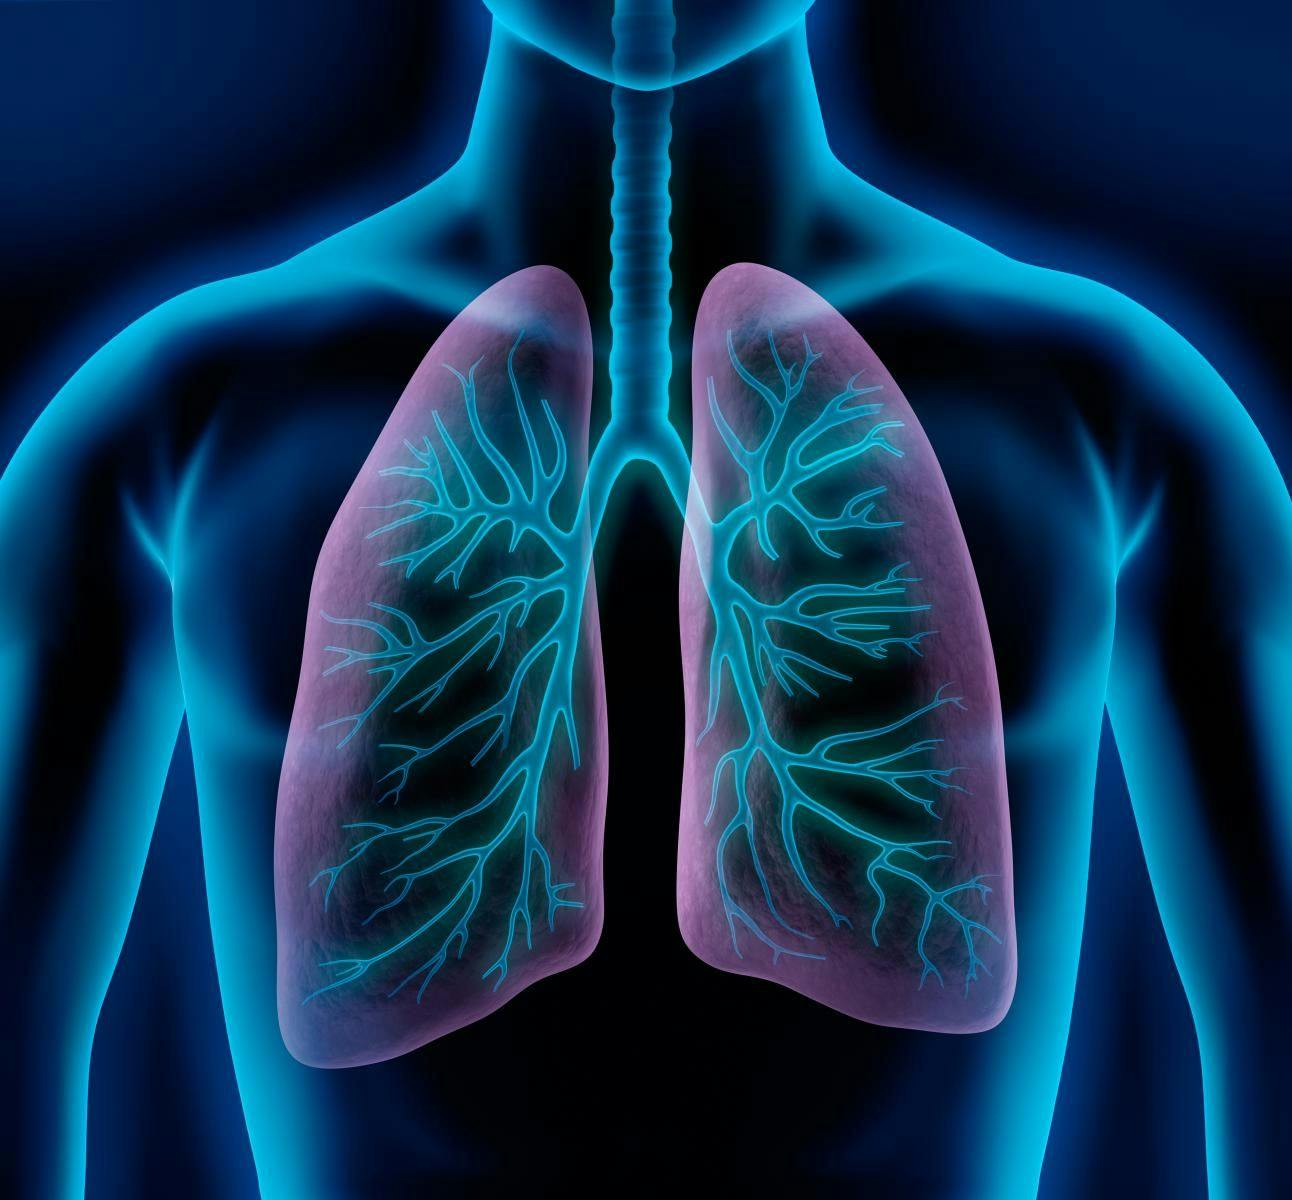 Pharmacological Therapy Can Treat COPD